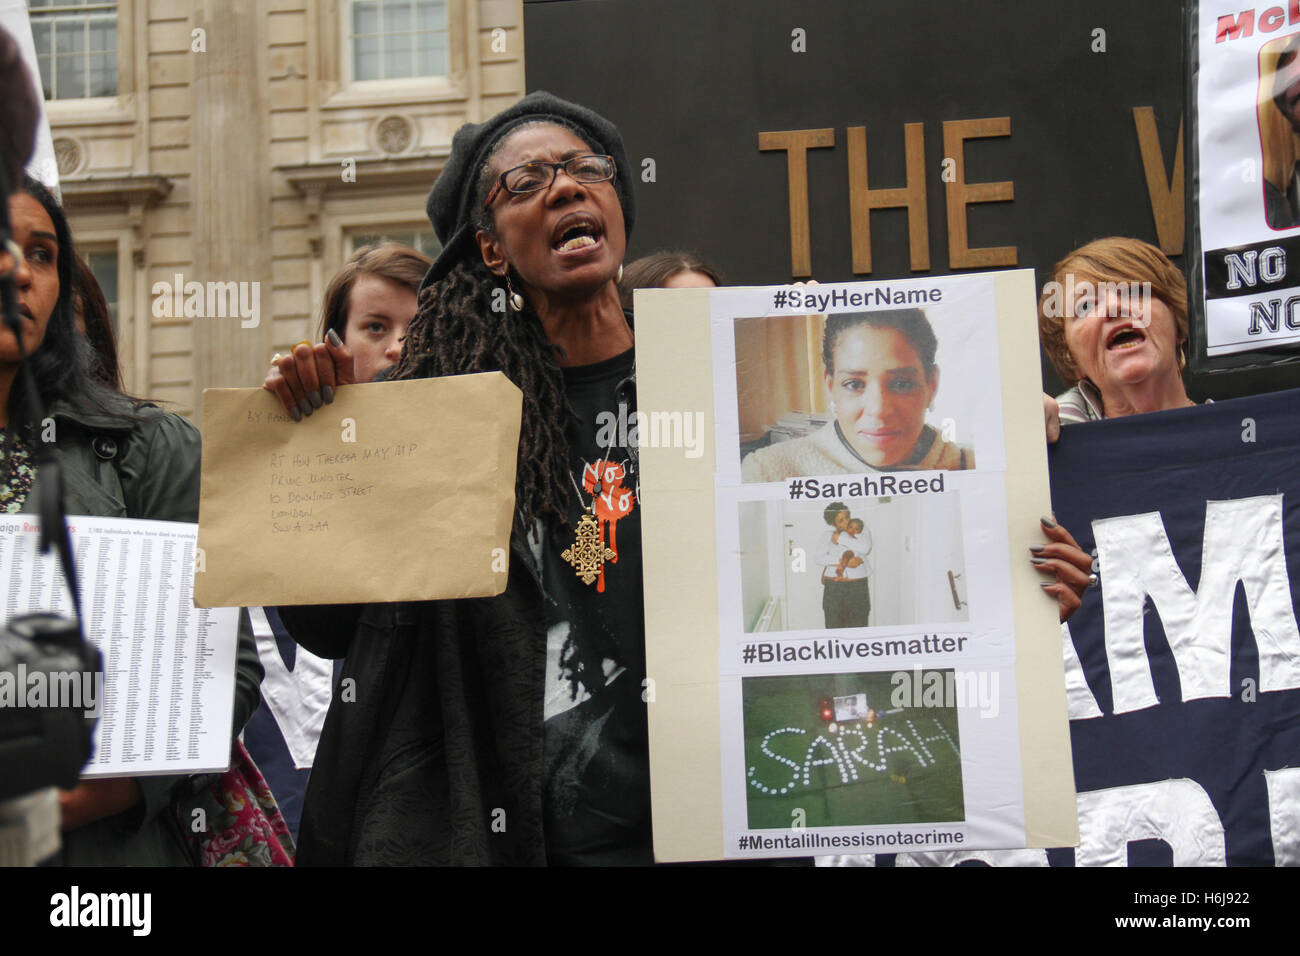 London, UK. 29th October, 2016. Marcia Rigg talk about Sarah Reed who died in 2012 in Holloway prison at the annual United Families and Friends Campaign (UFFC) remembrance procession at Trafalgar Square on 29 October 2016. The silent precession is in memeory for those who have died while in custody of the state. The UFFC have been marching for the past 18 years from Trafalgar Square to Downing Street. Todate, there have been 1577 death in police custody since 1990 with no convictions. Credit:  David Mbiyu/Alamy Live News Stock Photo